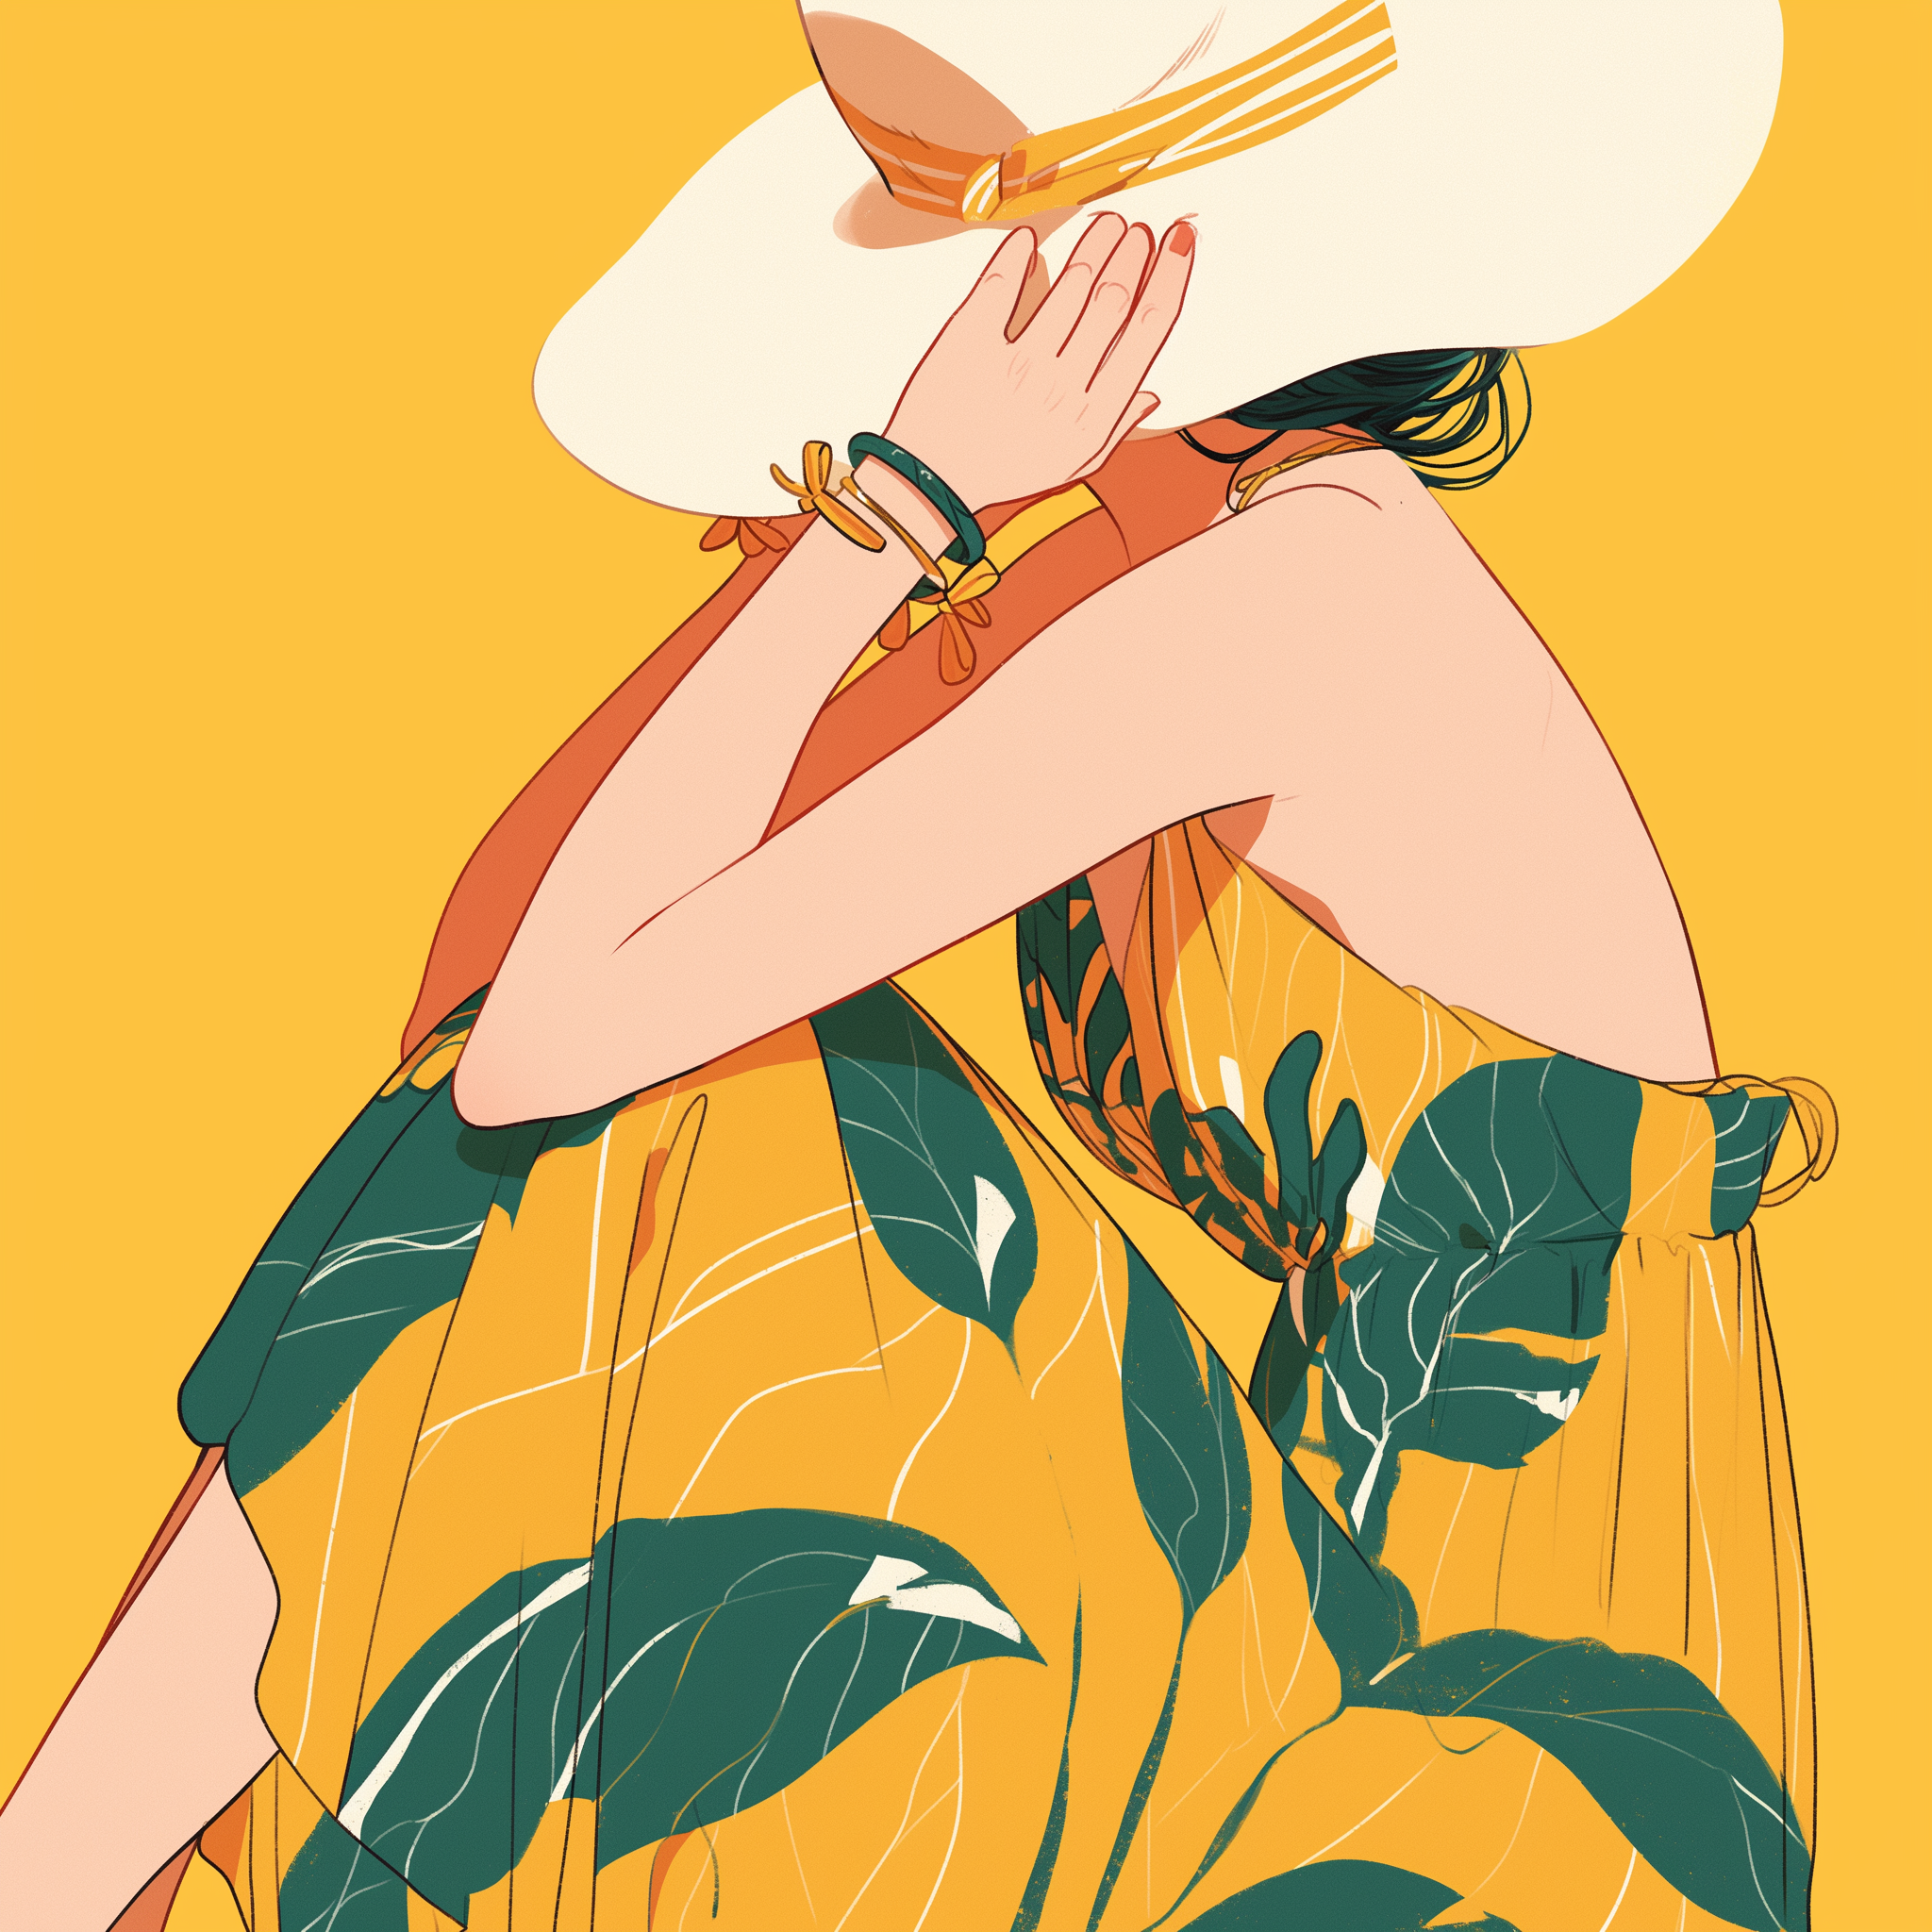 Woman in yellow sundress and wide-brimmed hat avatar illustration.